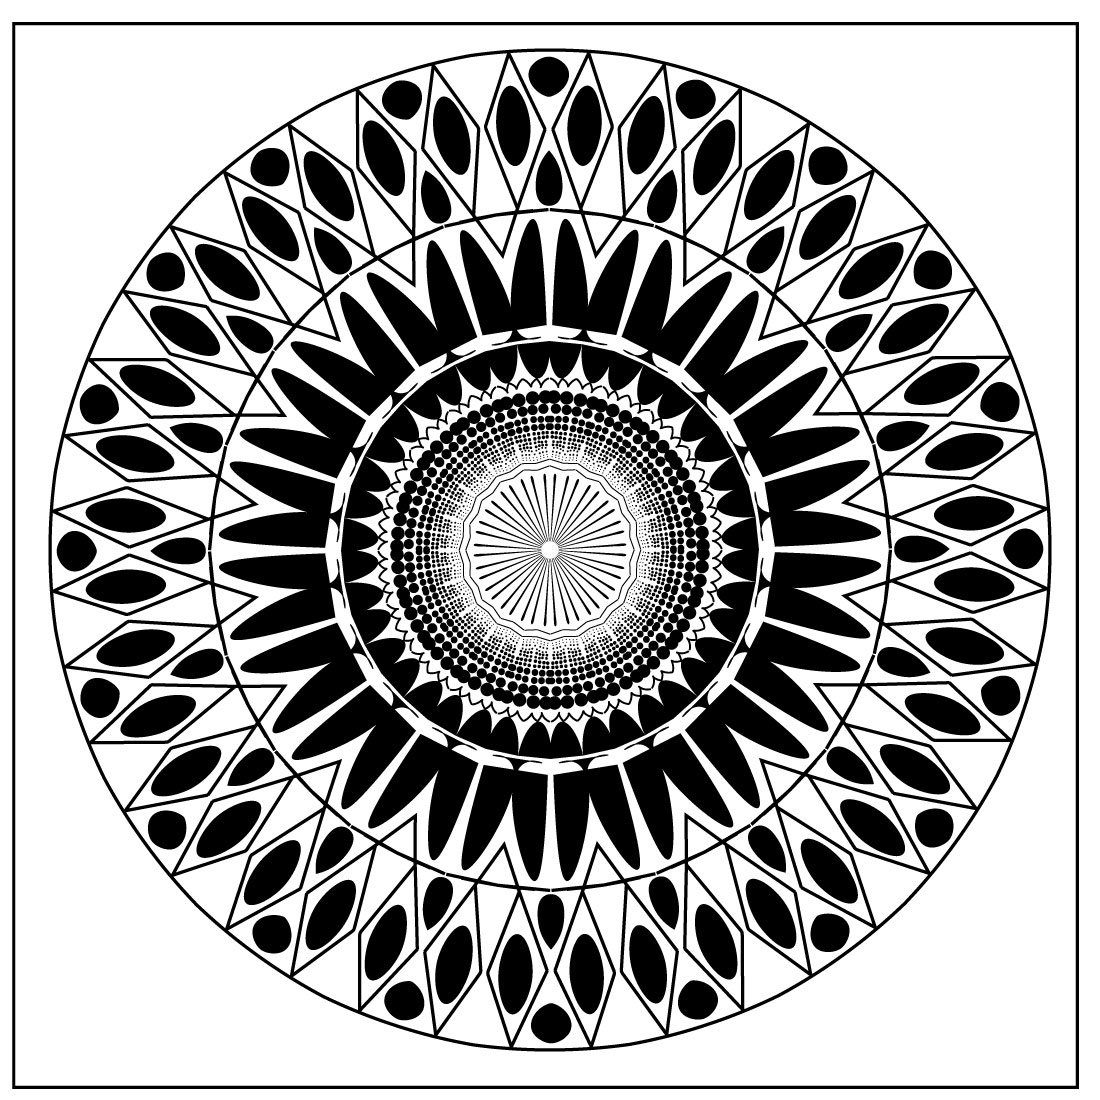 Mandala art with black white in babbles preview image.